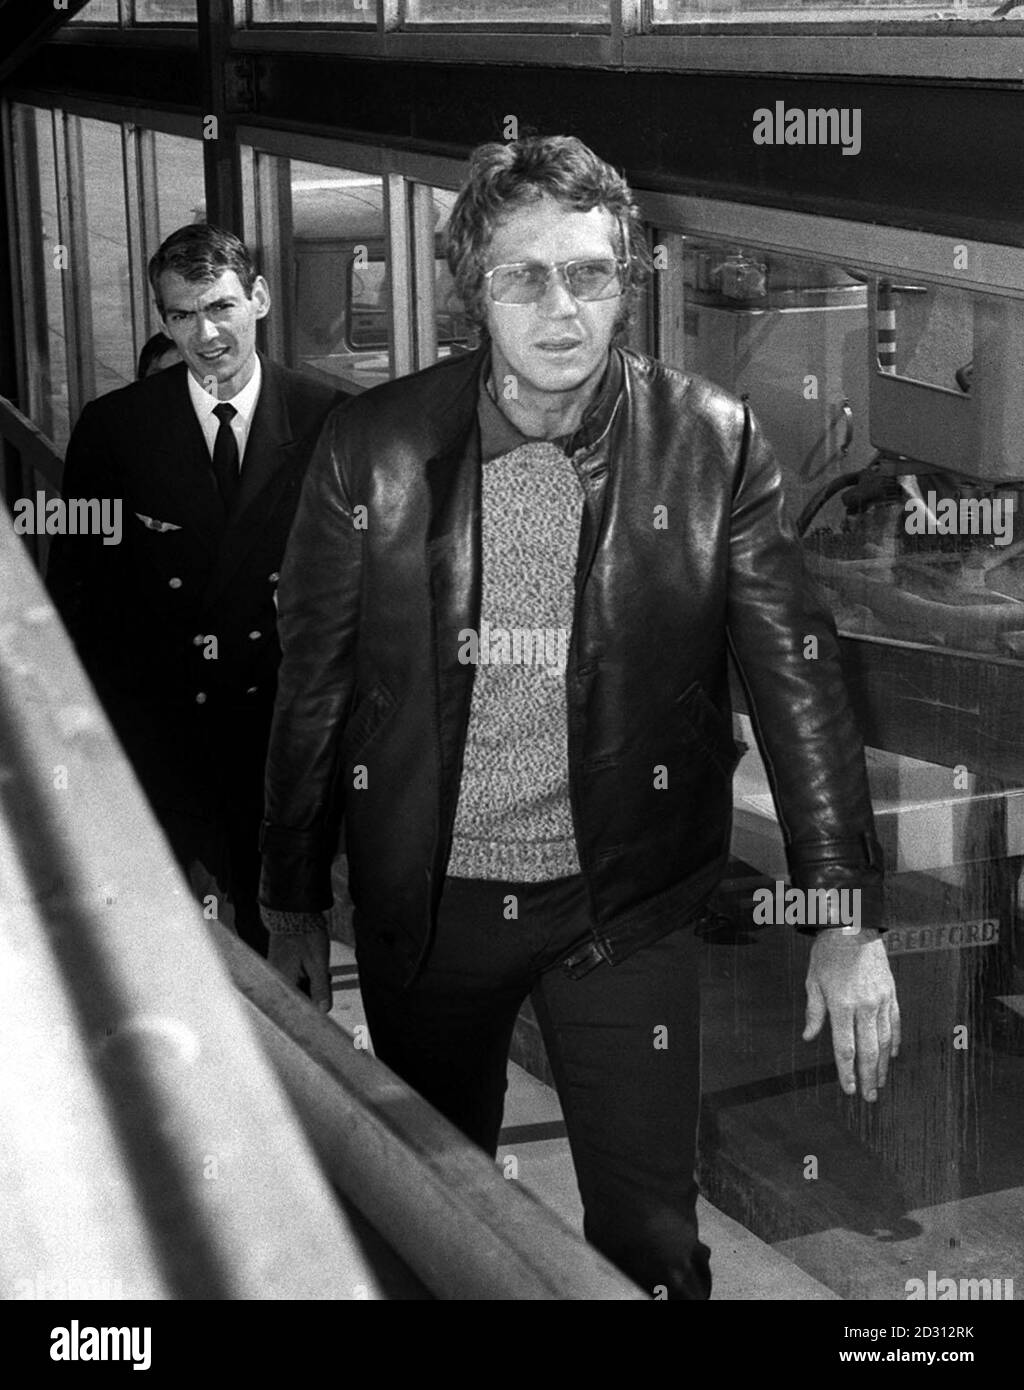 American actor and racing driver Steve McQueen (right) leaving Heathrow Airport in London, where he is heading to France to attempt to enter the Le Mans 24 hour sports car race. Stock Photo